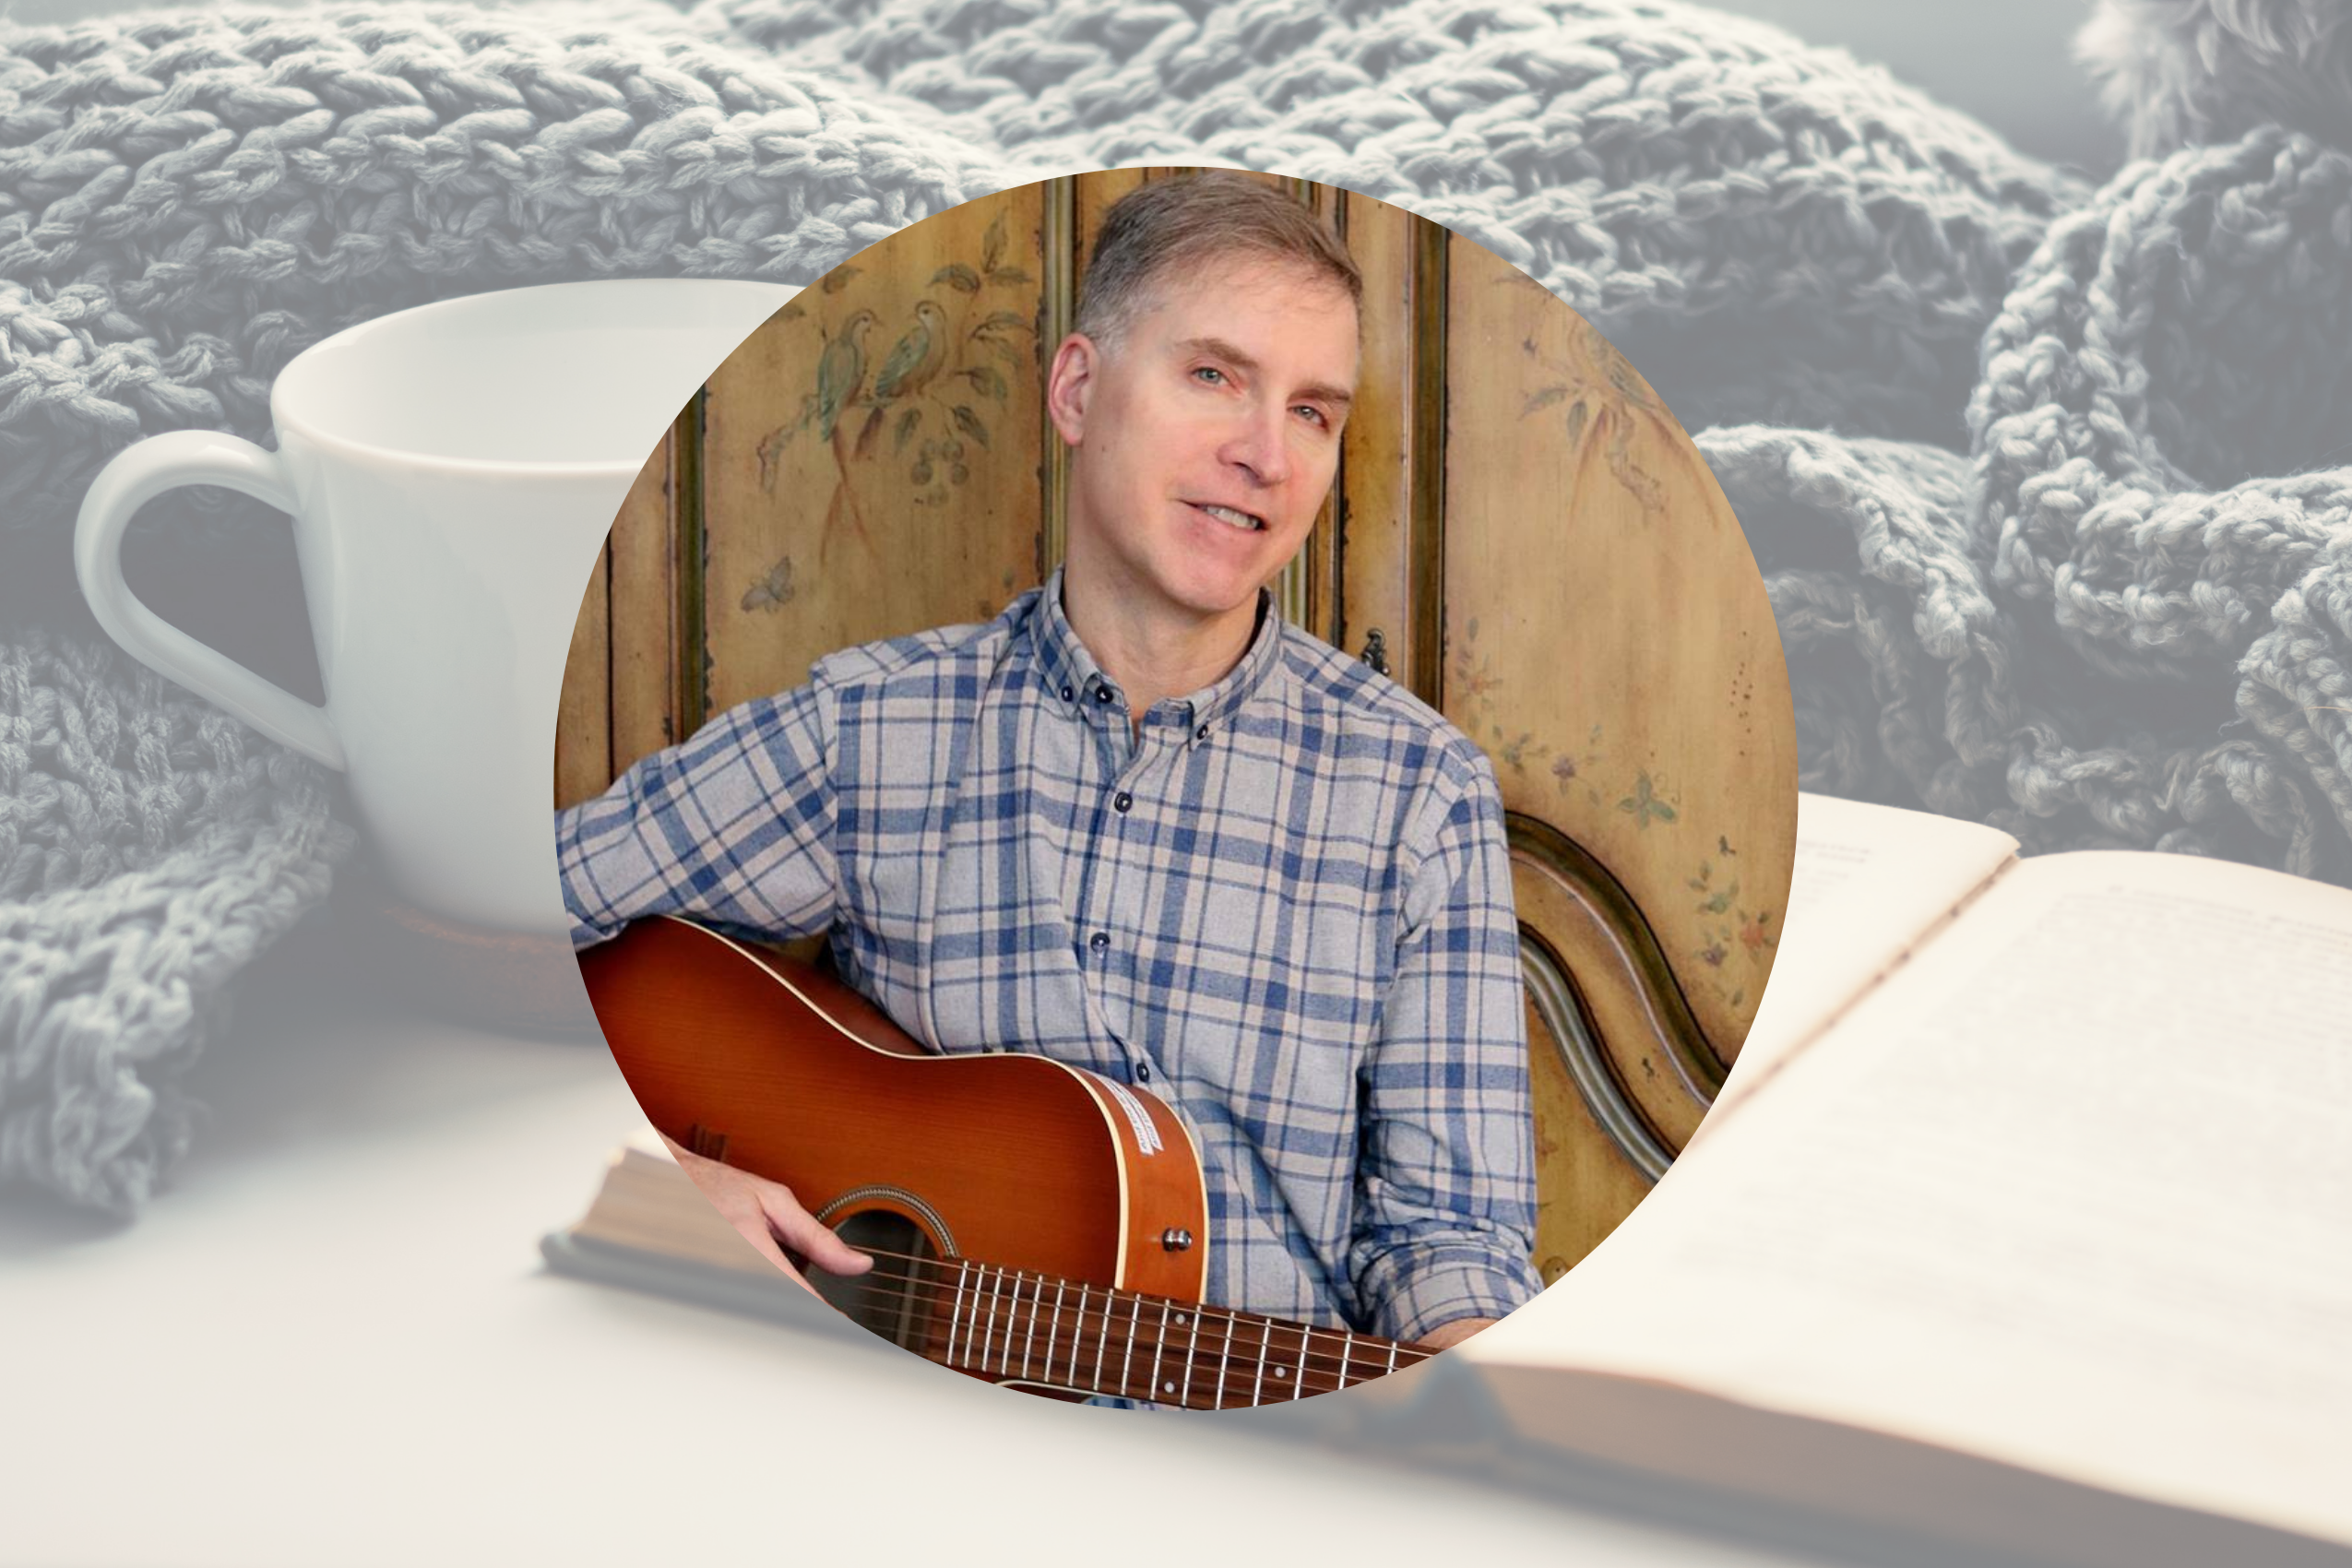 drew velting playing guitar with book, cup and blanket in background